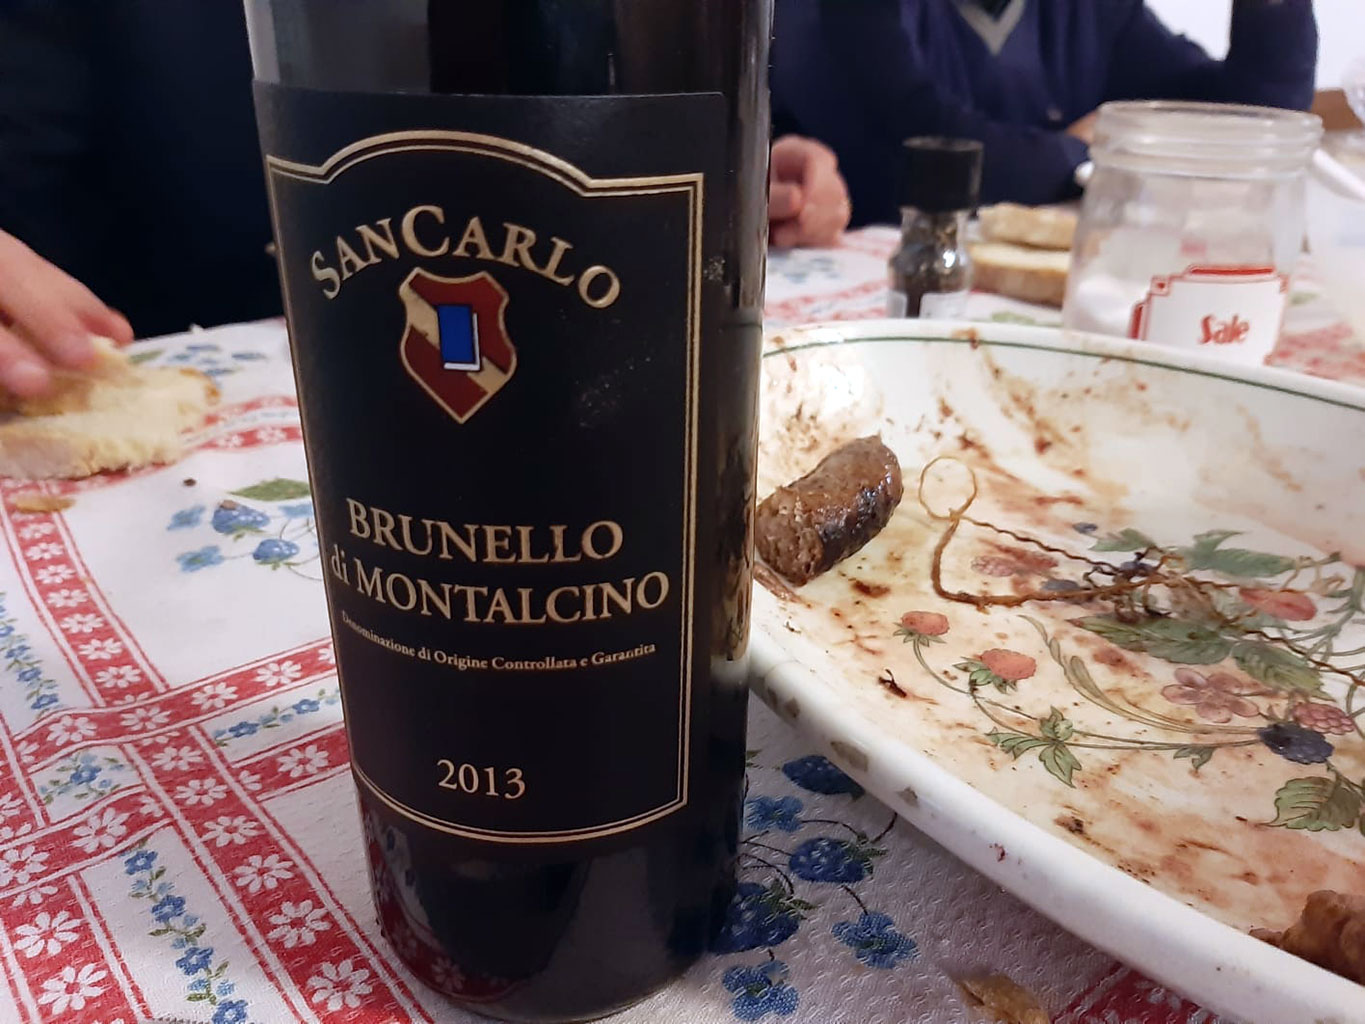 Christmas dinner with friends and Brunello by Gemma... What else?